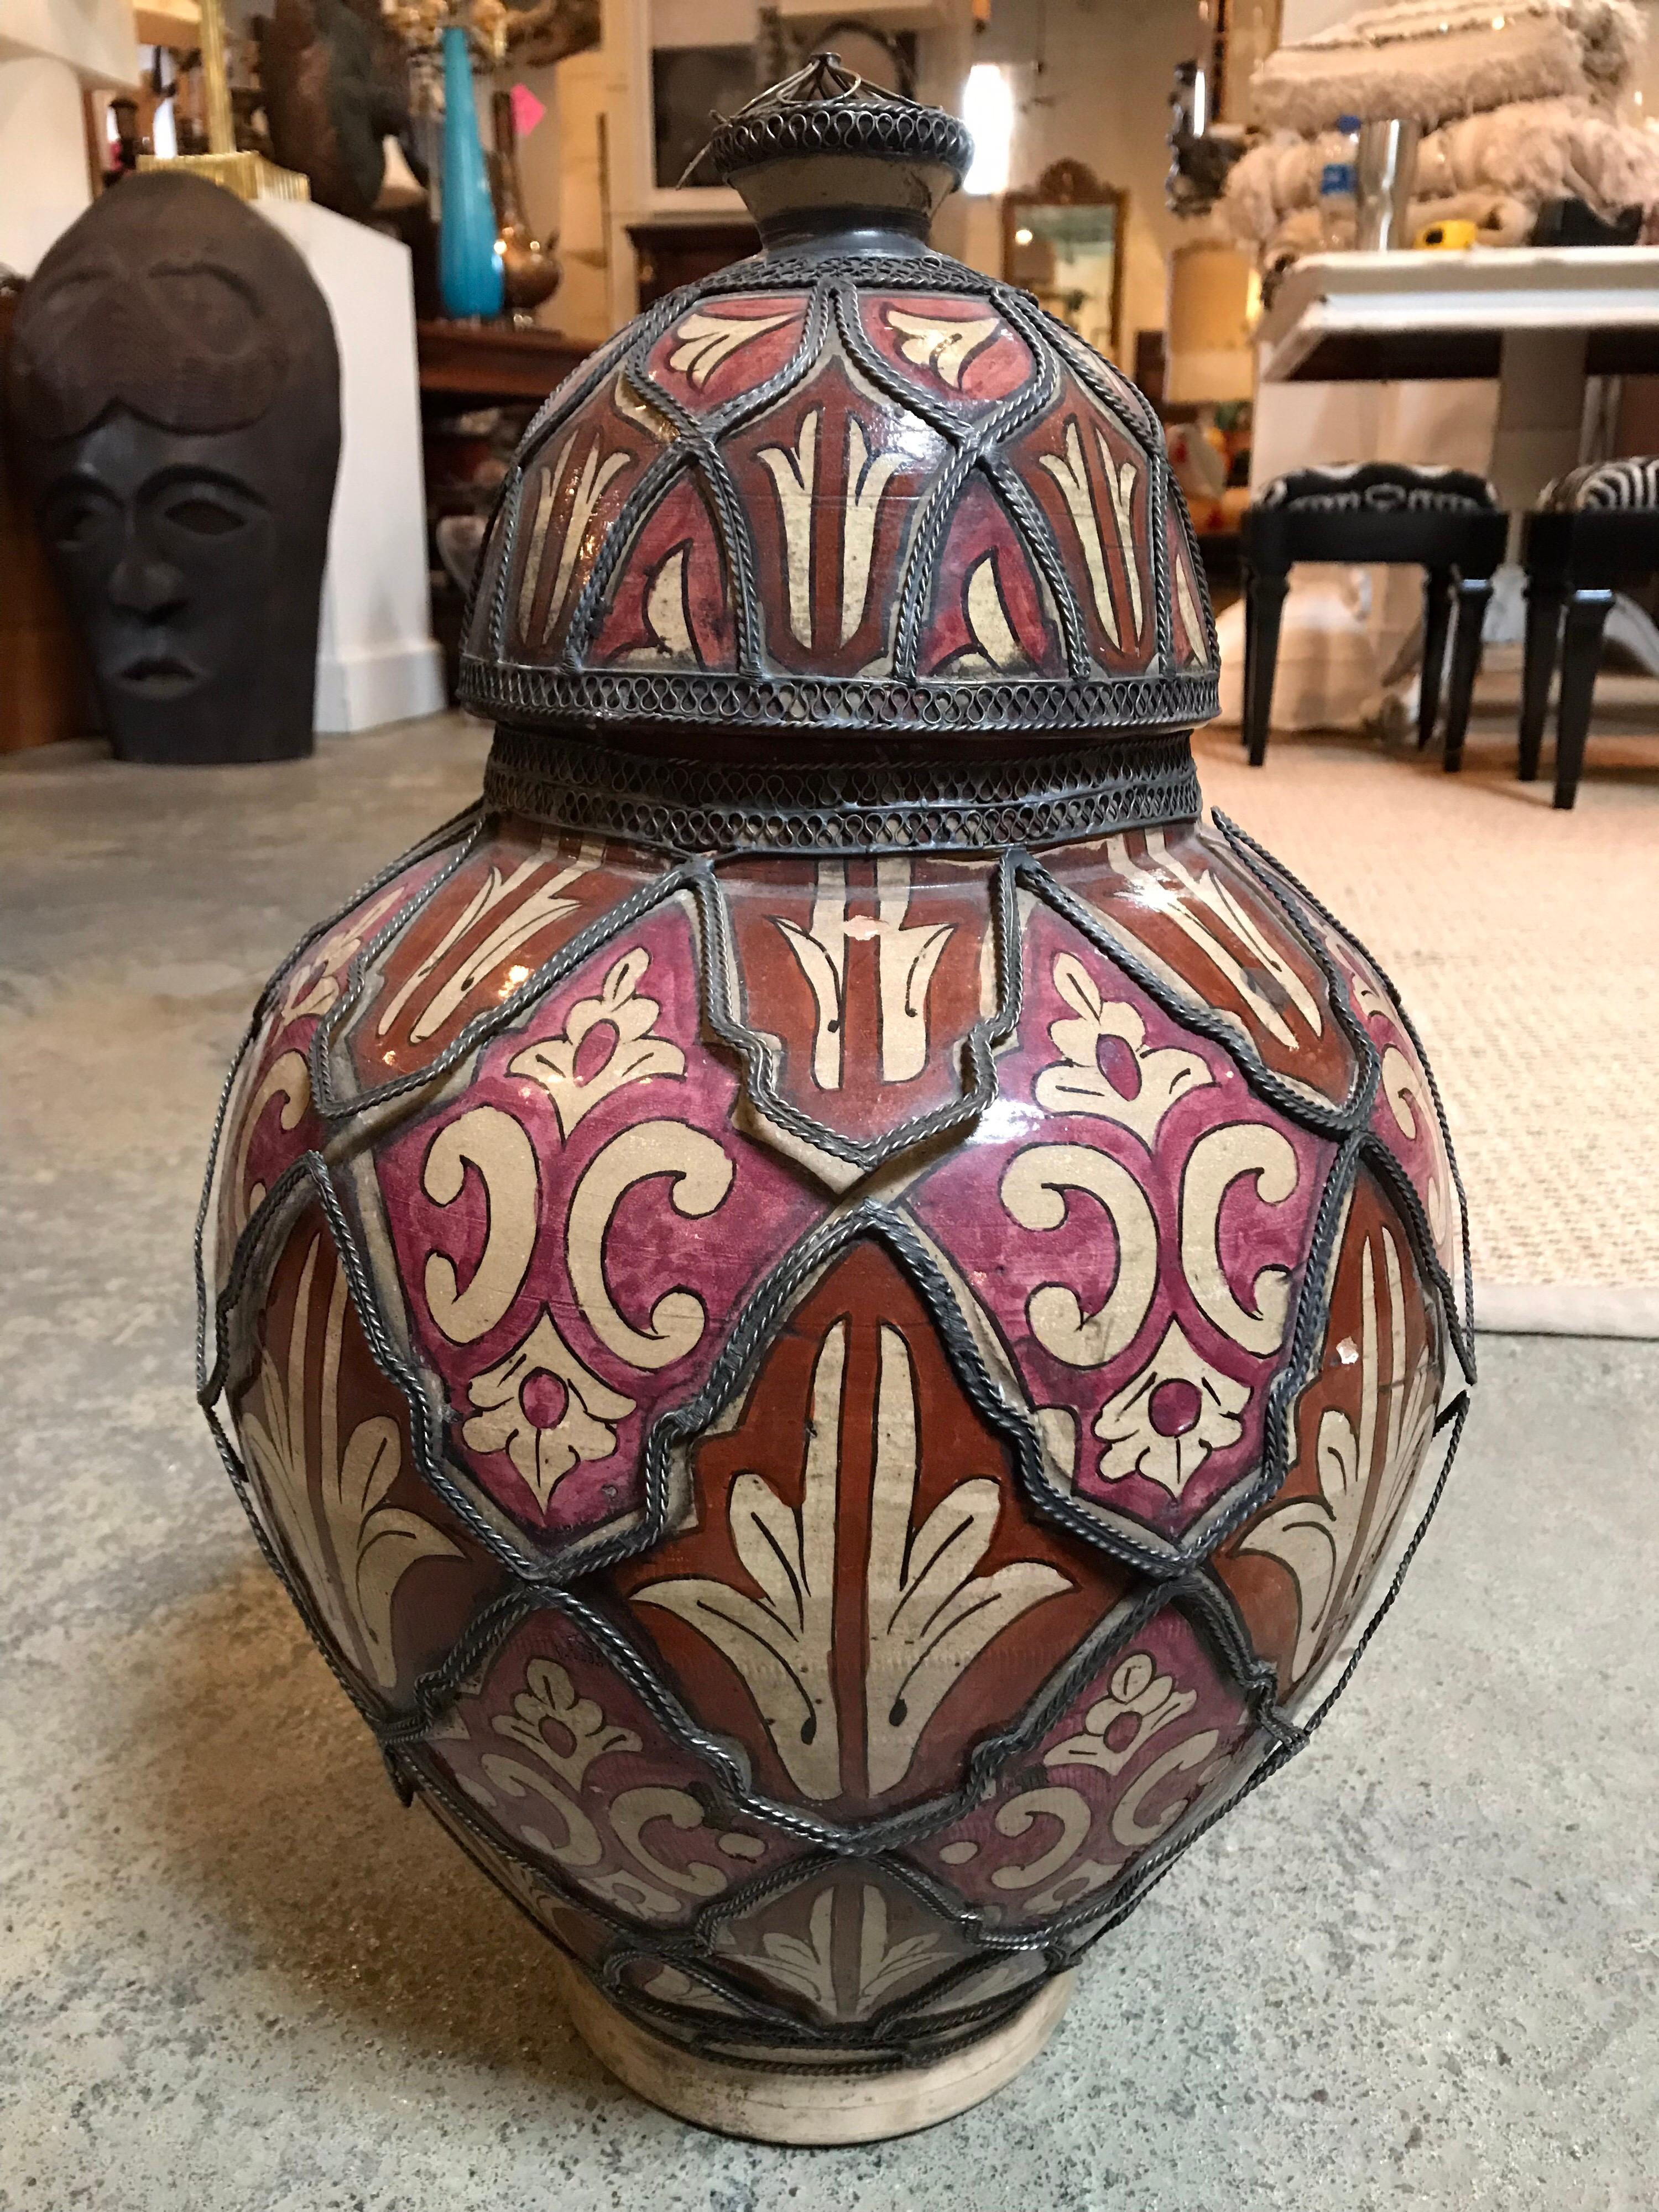 This vintage red Moroccan pot has white details painted on it and it is wrapped in decorative metal strips.